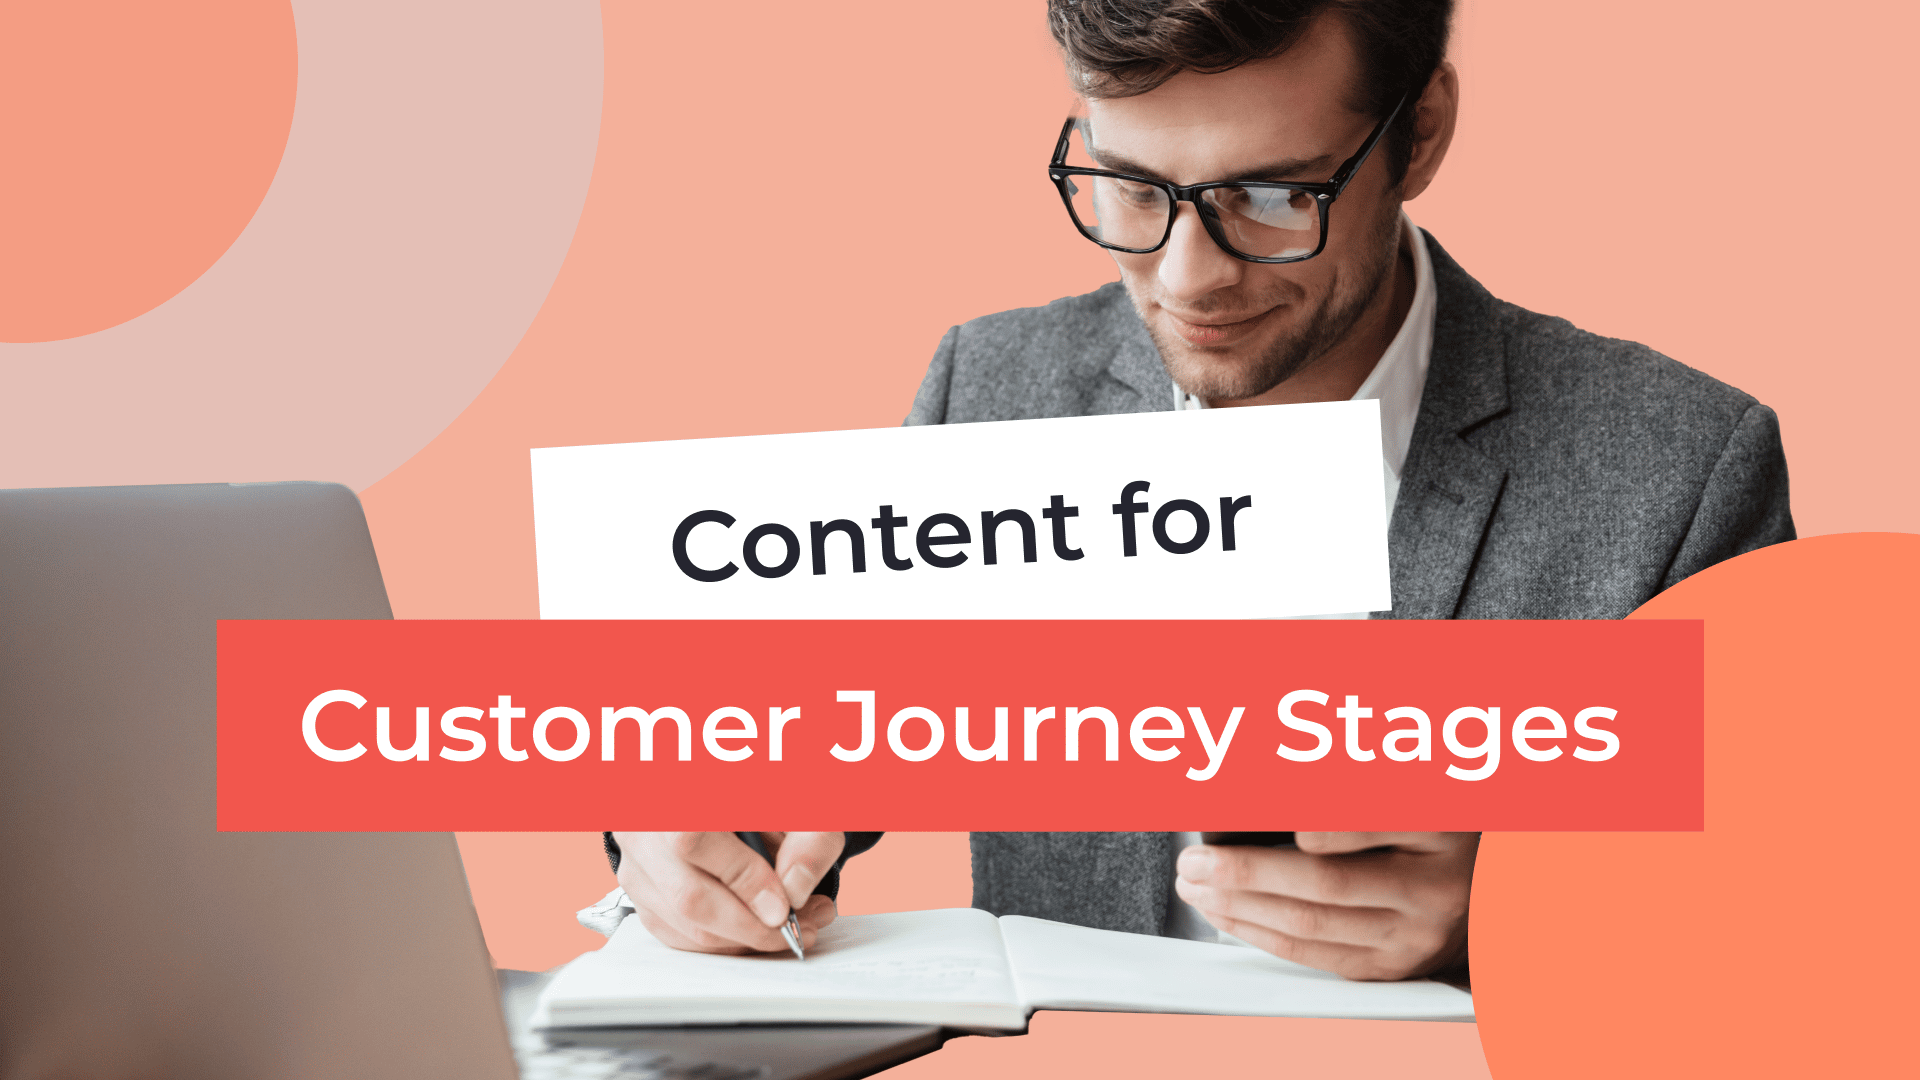 What Content Should You Add for Each Stage of the Customer Journey?